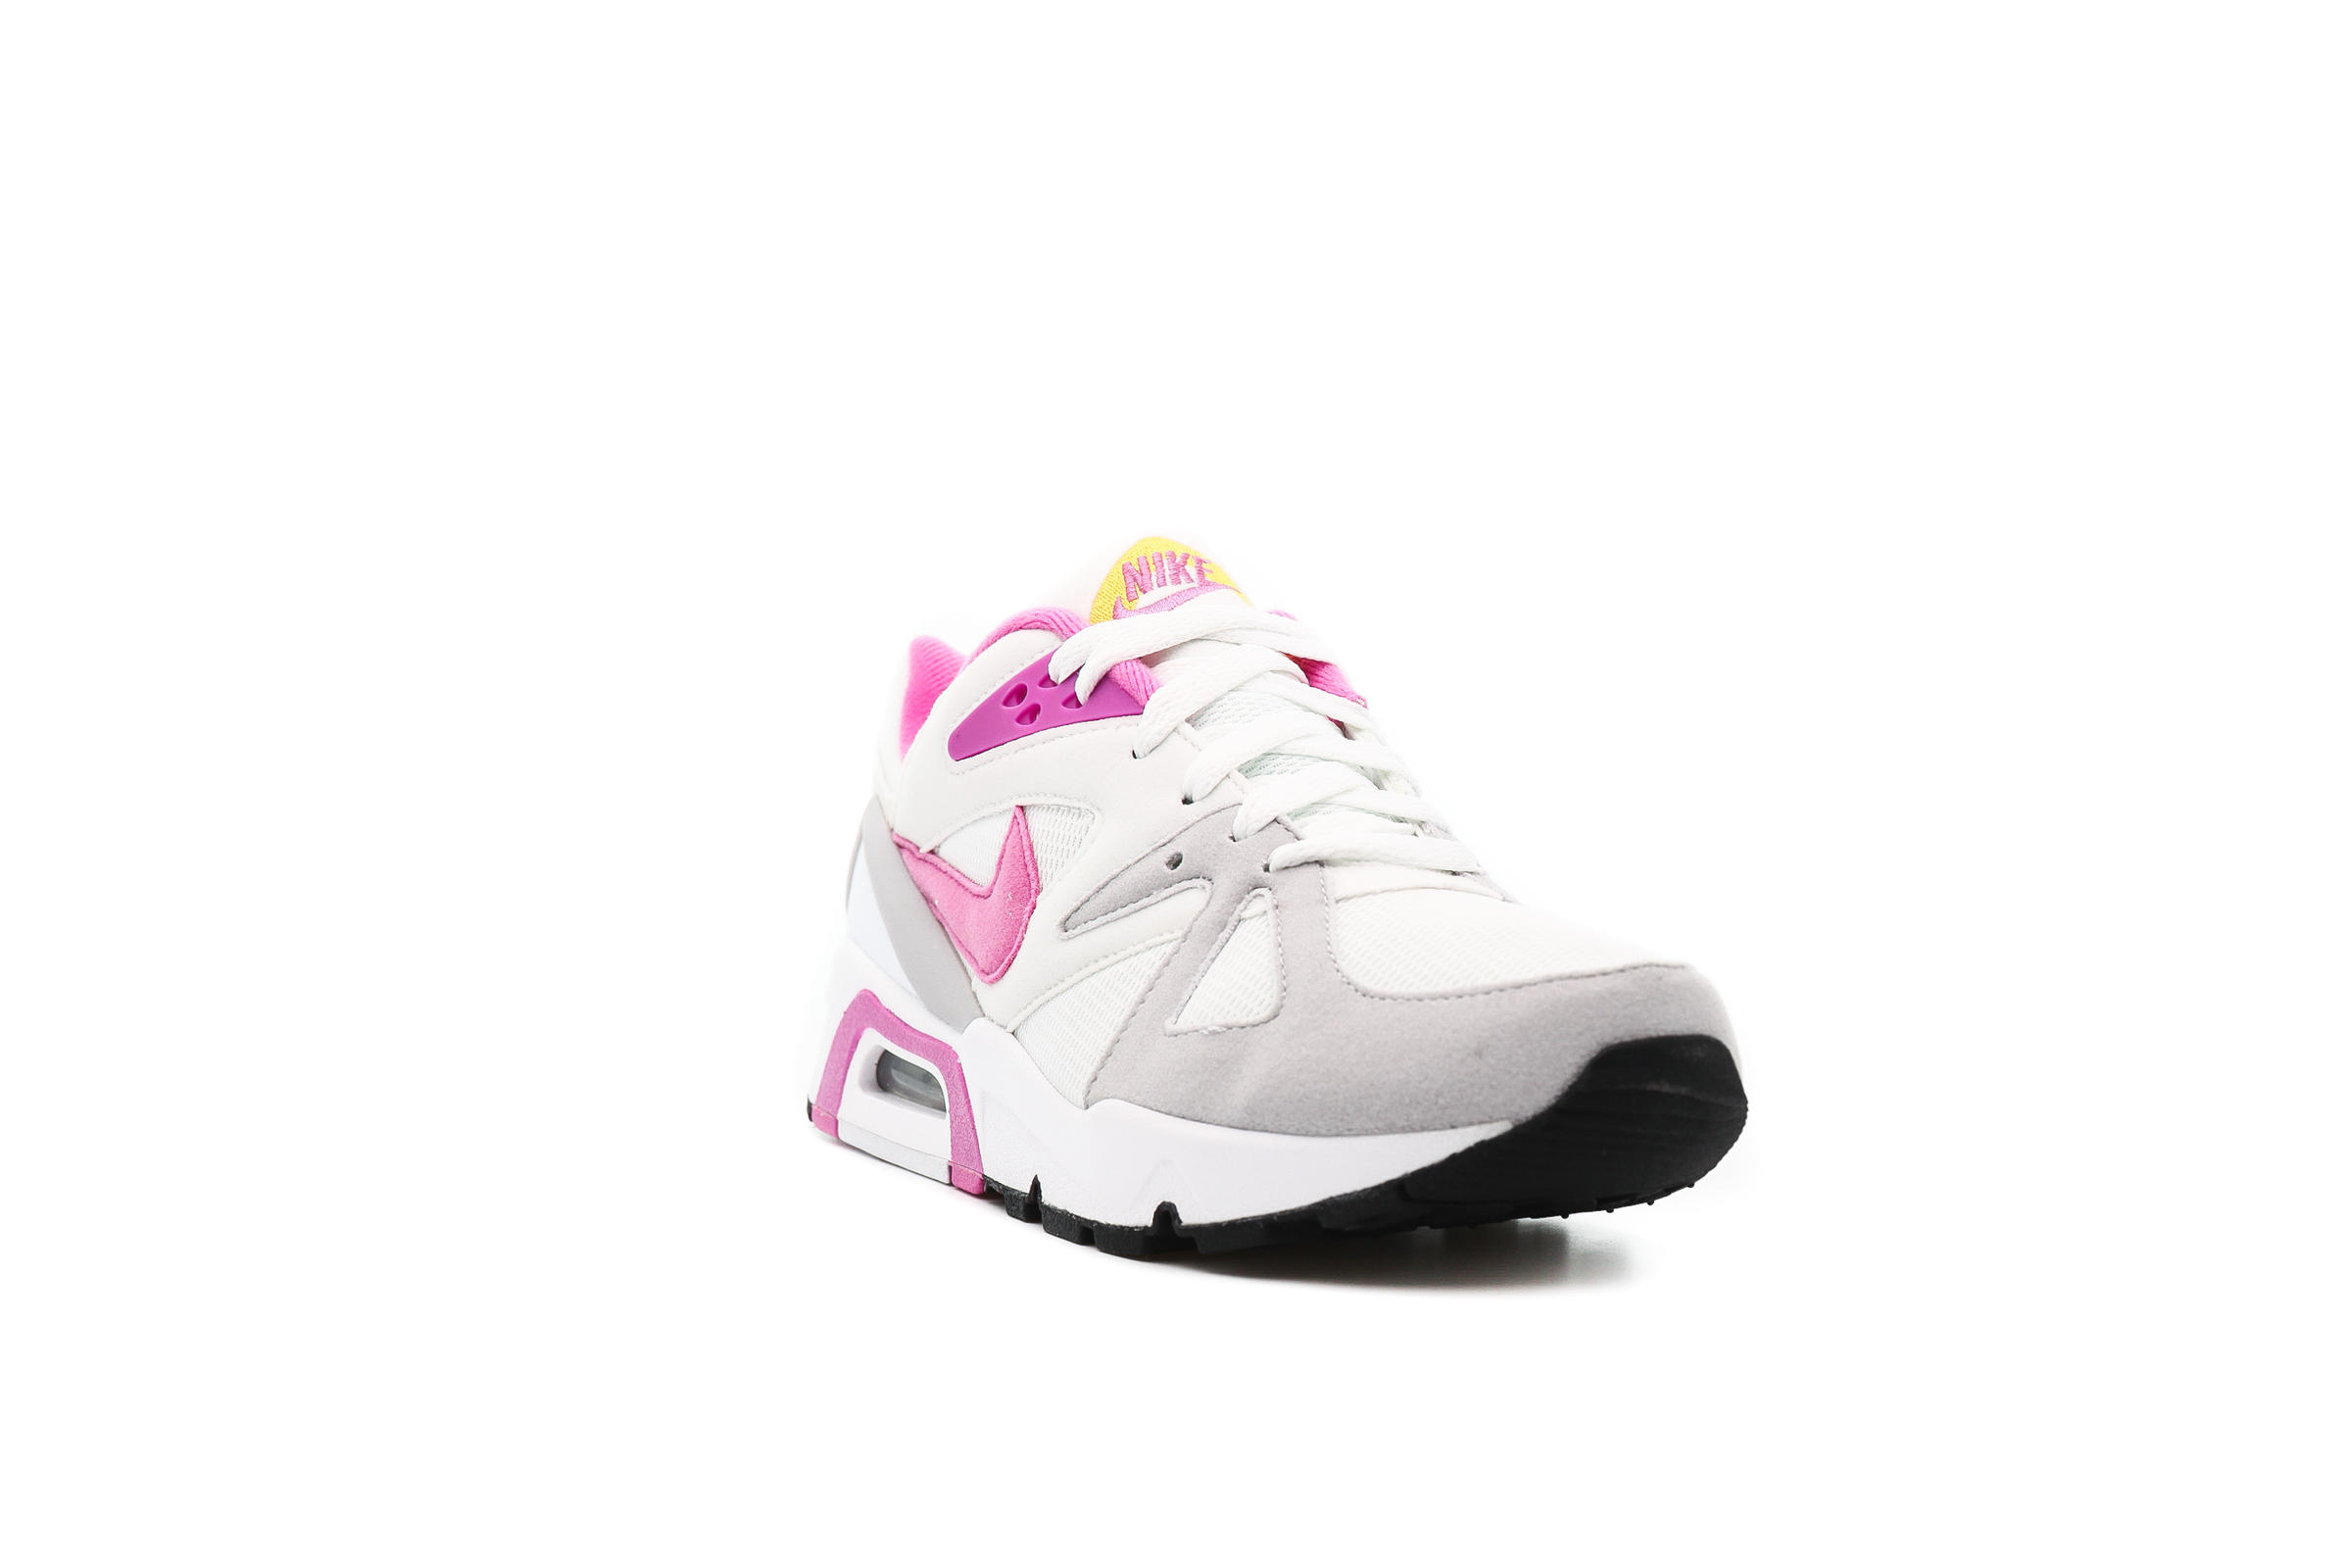 Nike WMNS AIR STRUCTURE OG "WHITE"